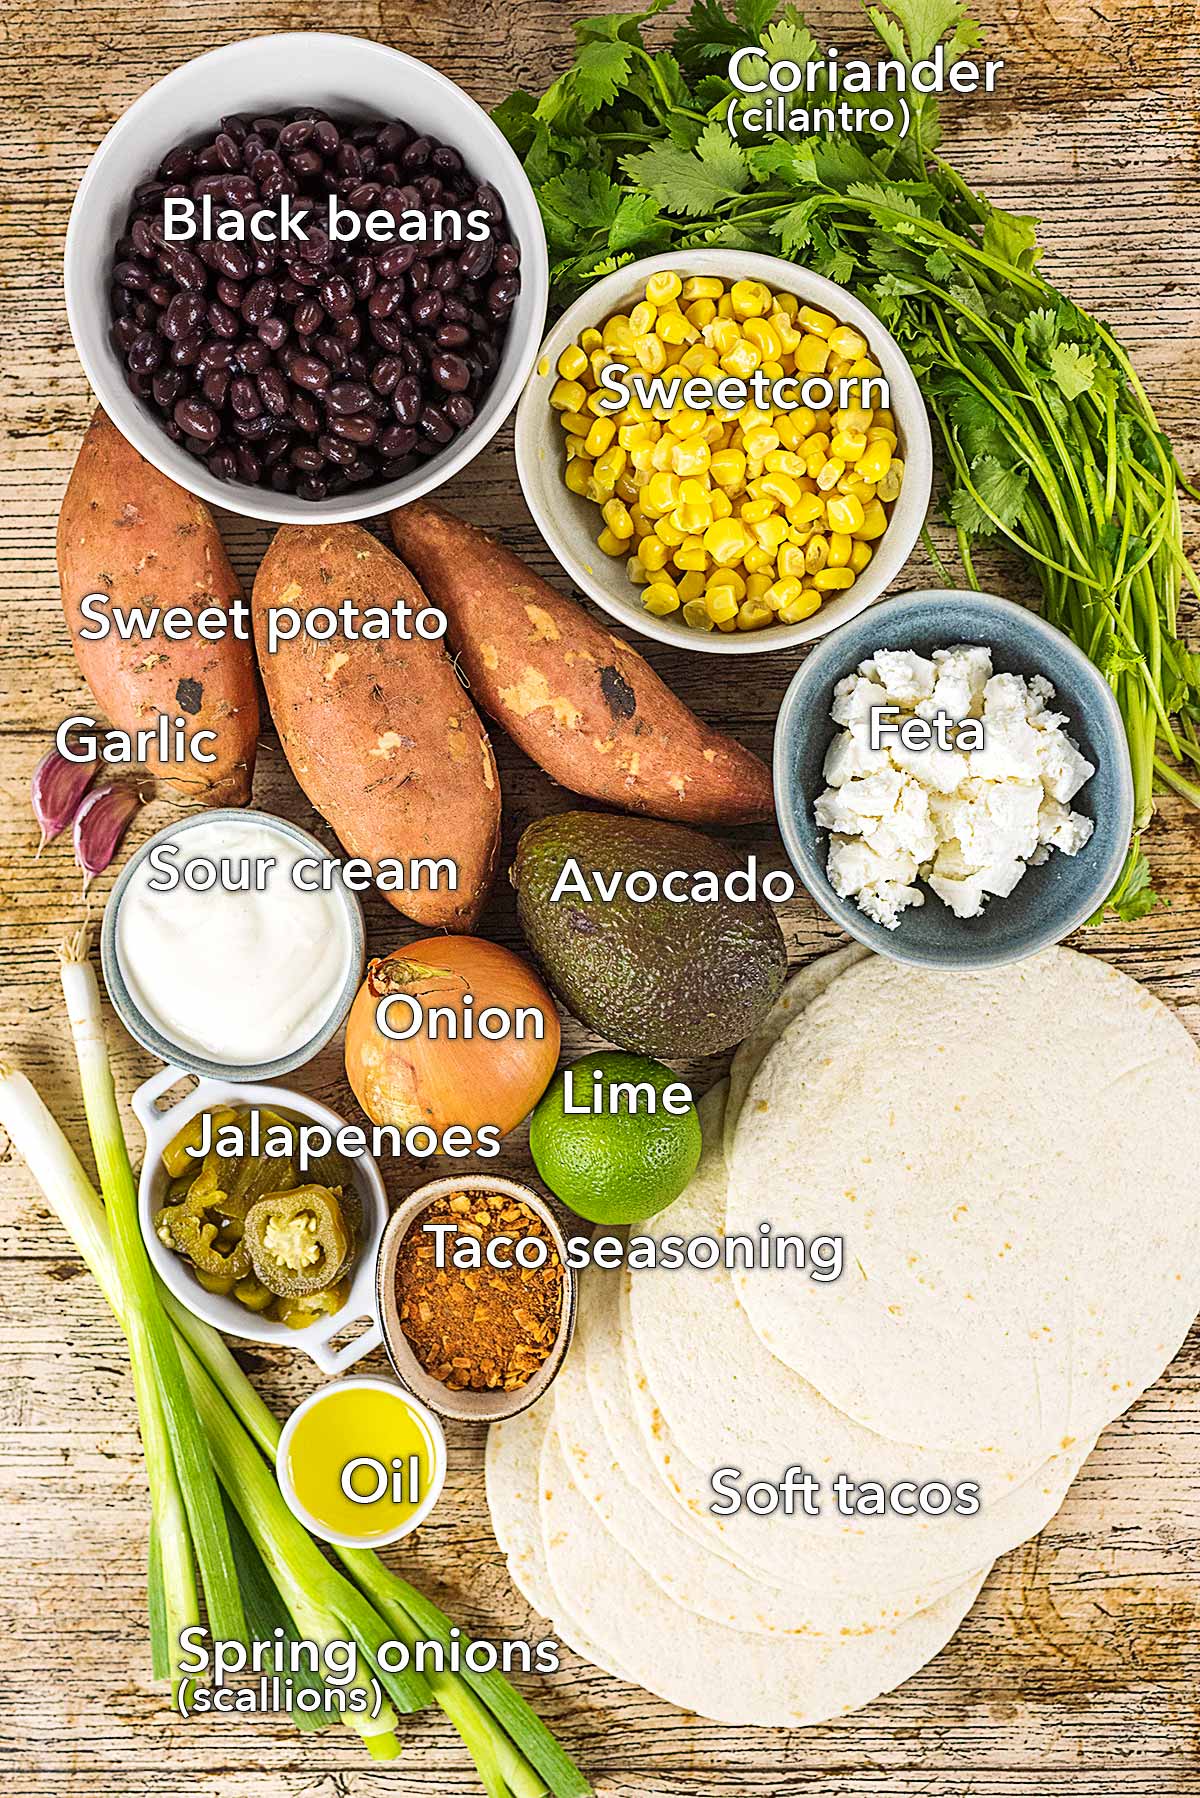 Ingredients needed to make this recipe laid out on a wooden surface.